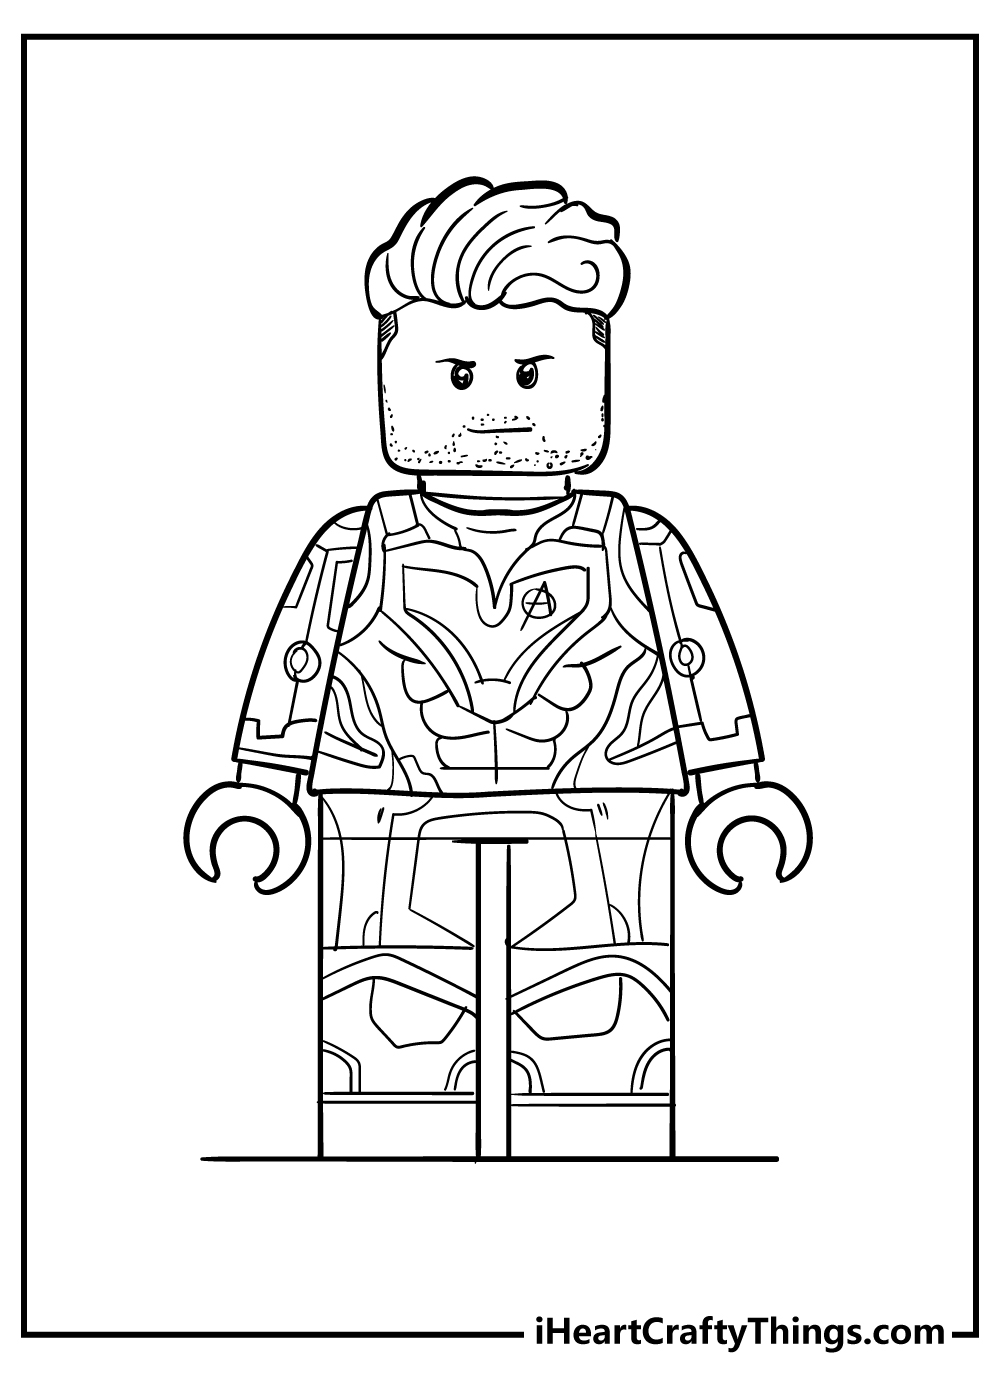 Printable Lego Avengers Coloring Pages Updated 20